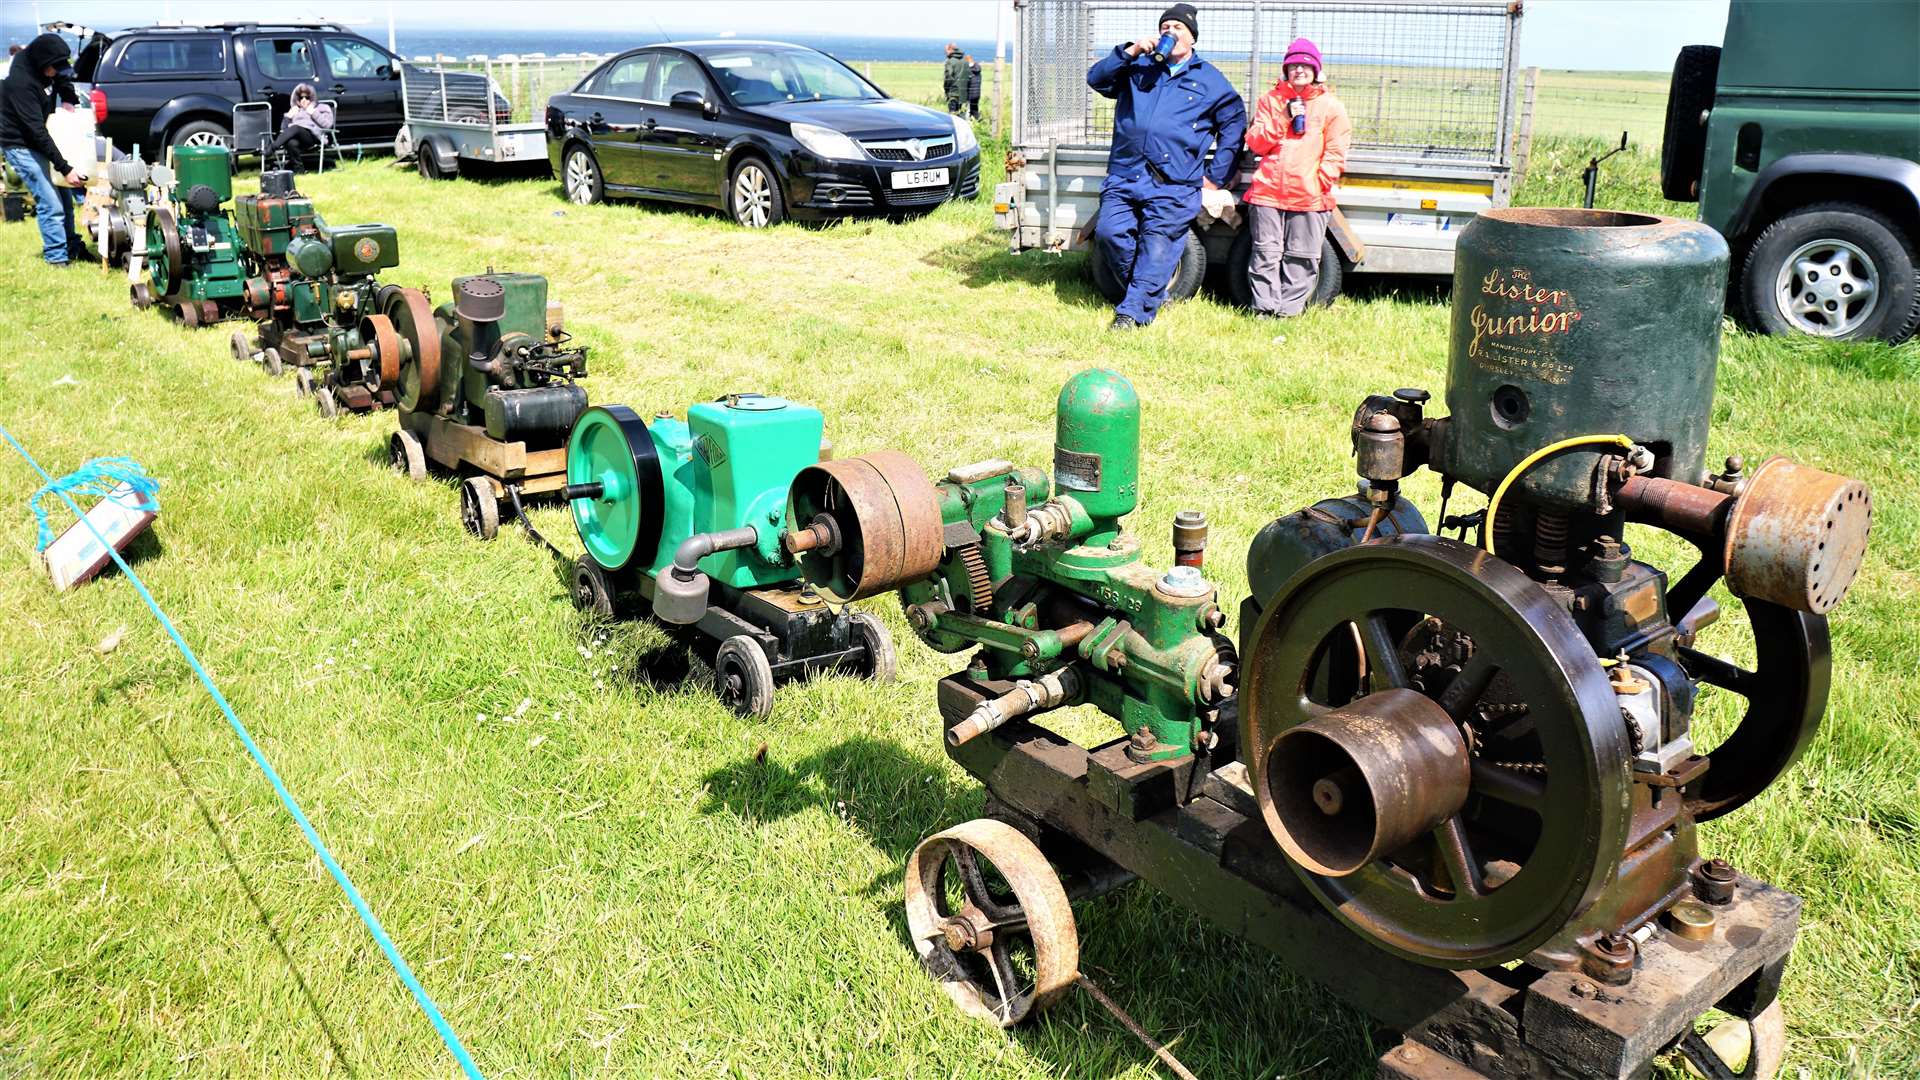 Stationary engines displayed at the entrance to the field.